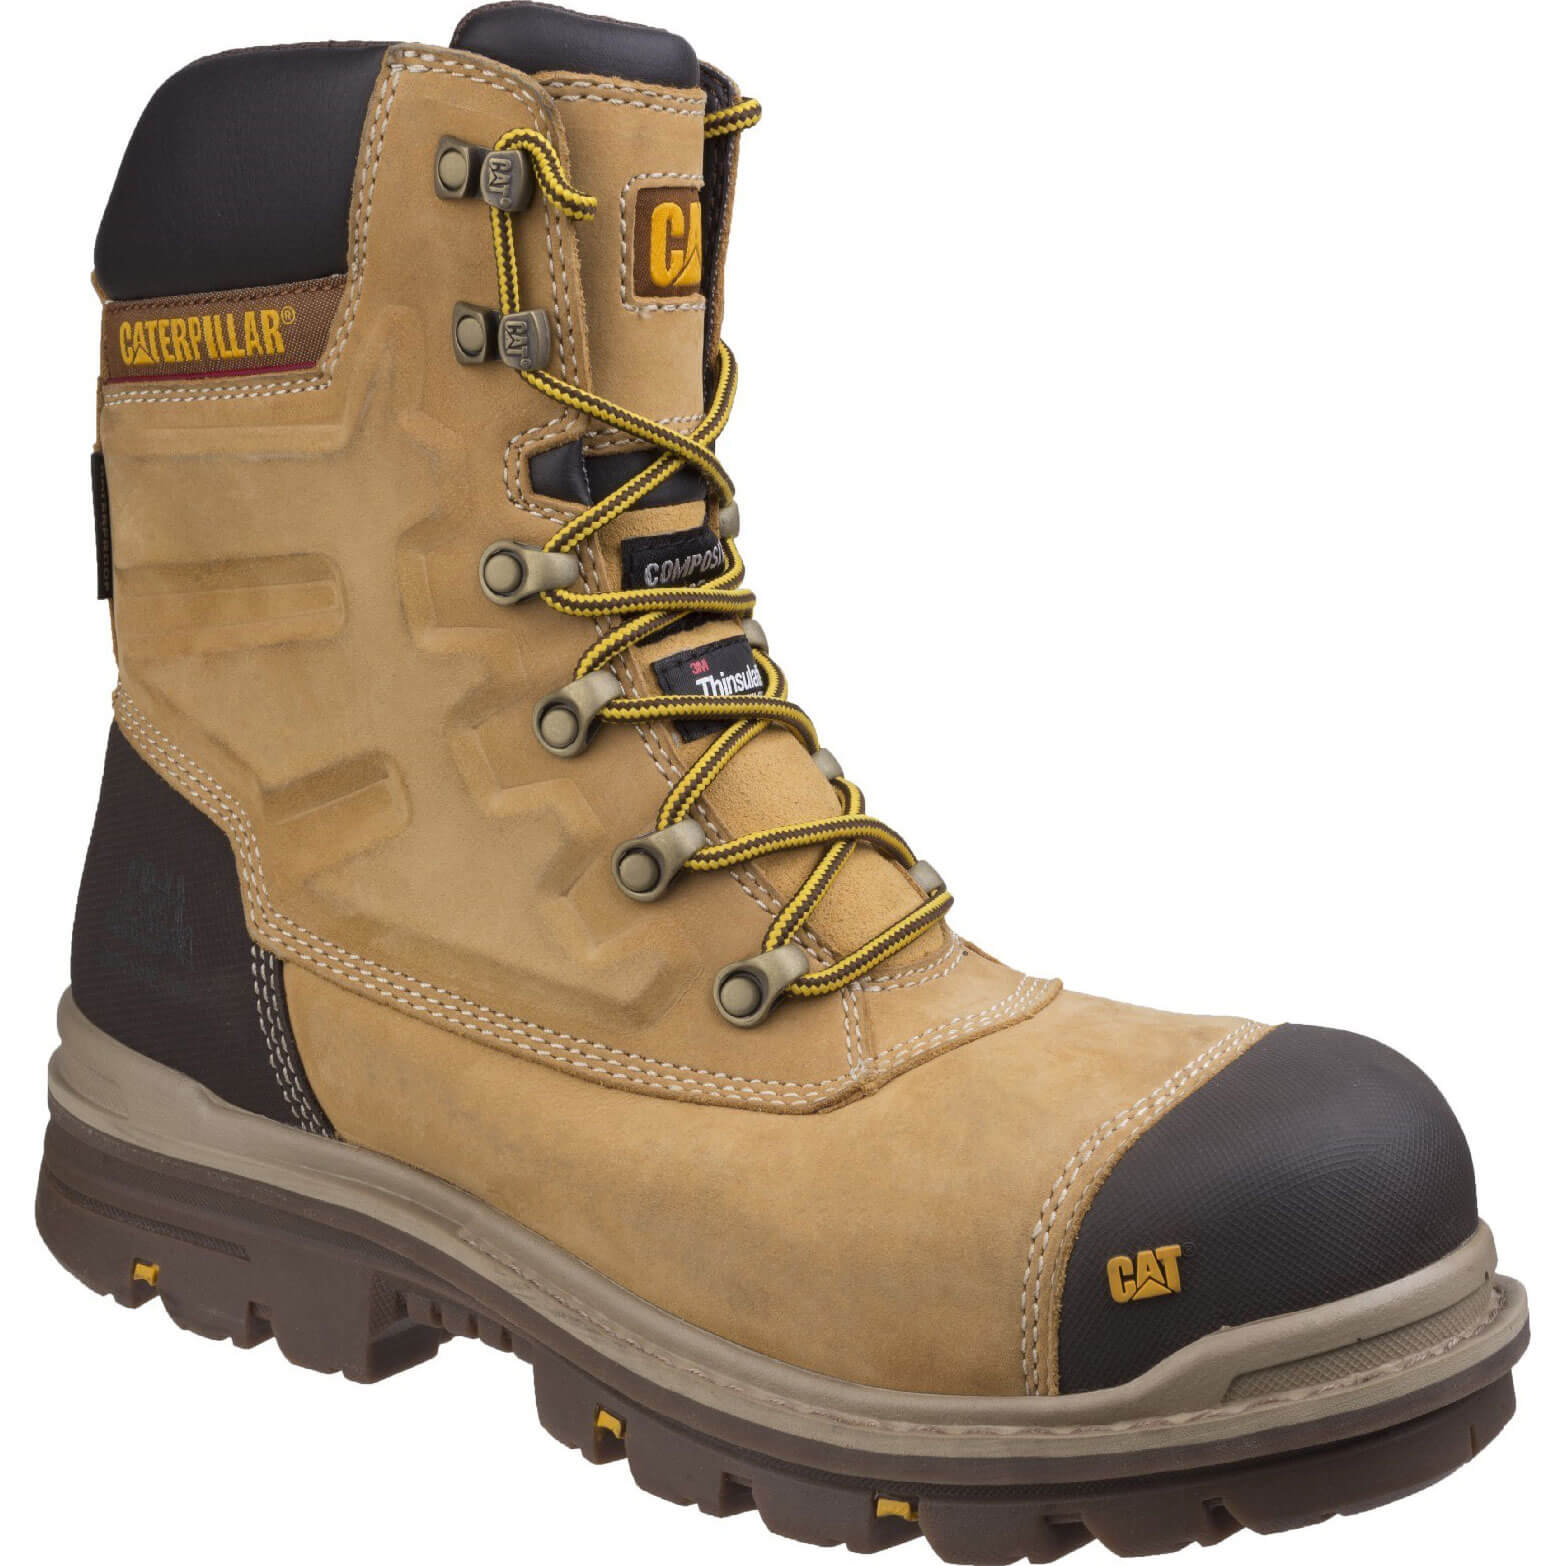 Image of Caterpillar Mens Premier Waterproof Safety Boots Honey Size 6